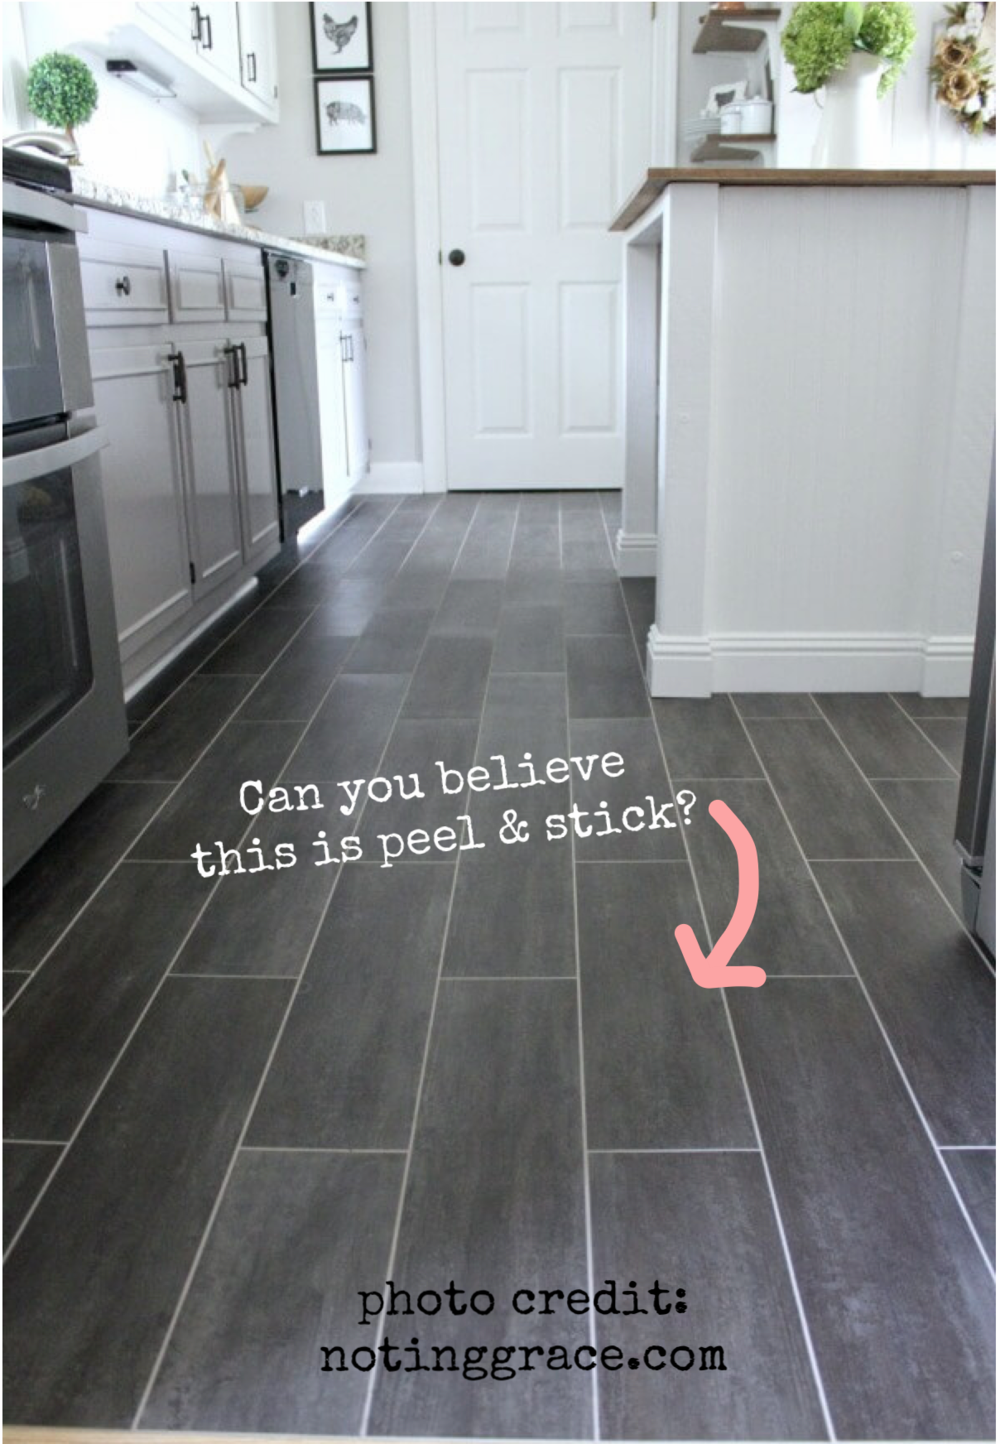 Ideas For Covering Up Tile Floors, What Flooring Can Be Laid Over Ceramic Tiles